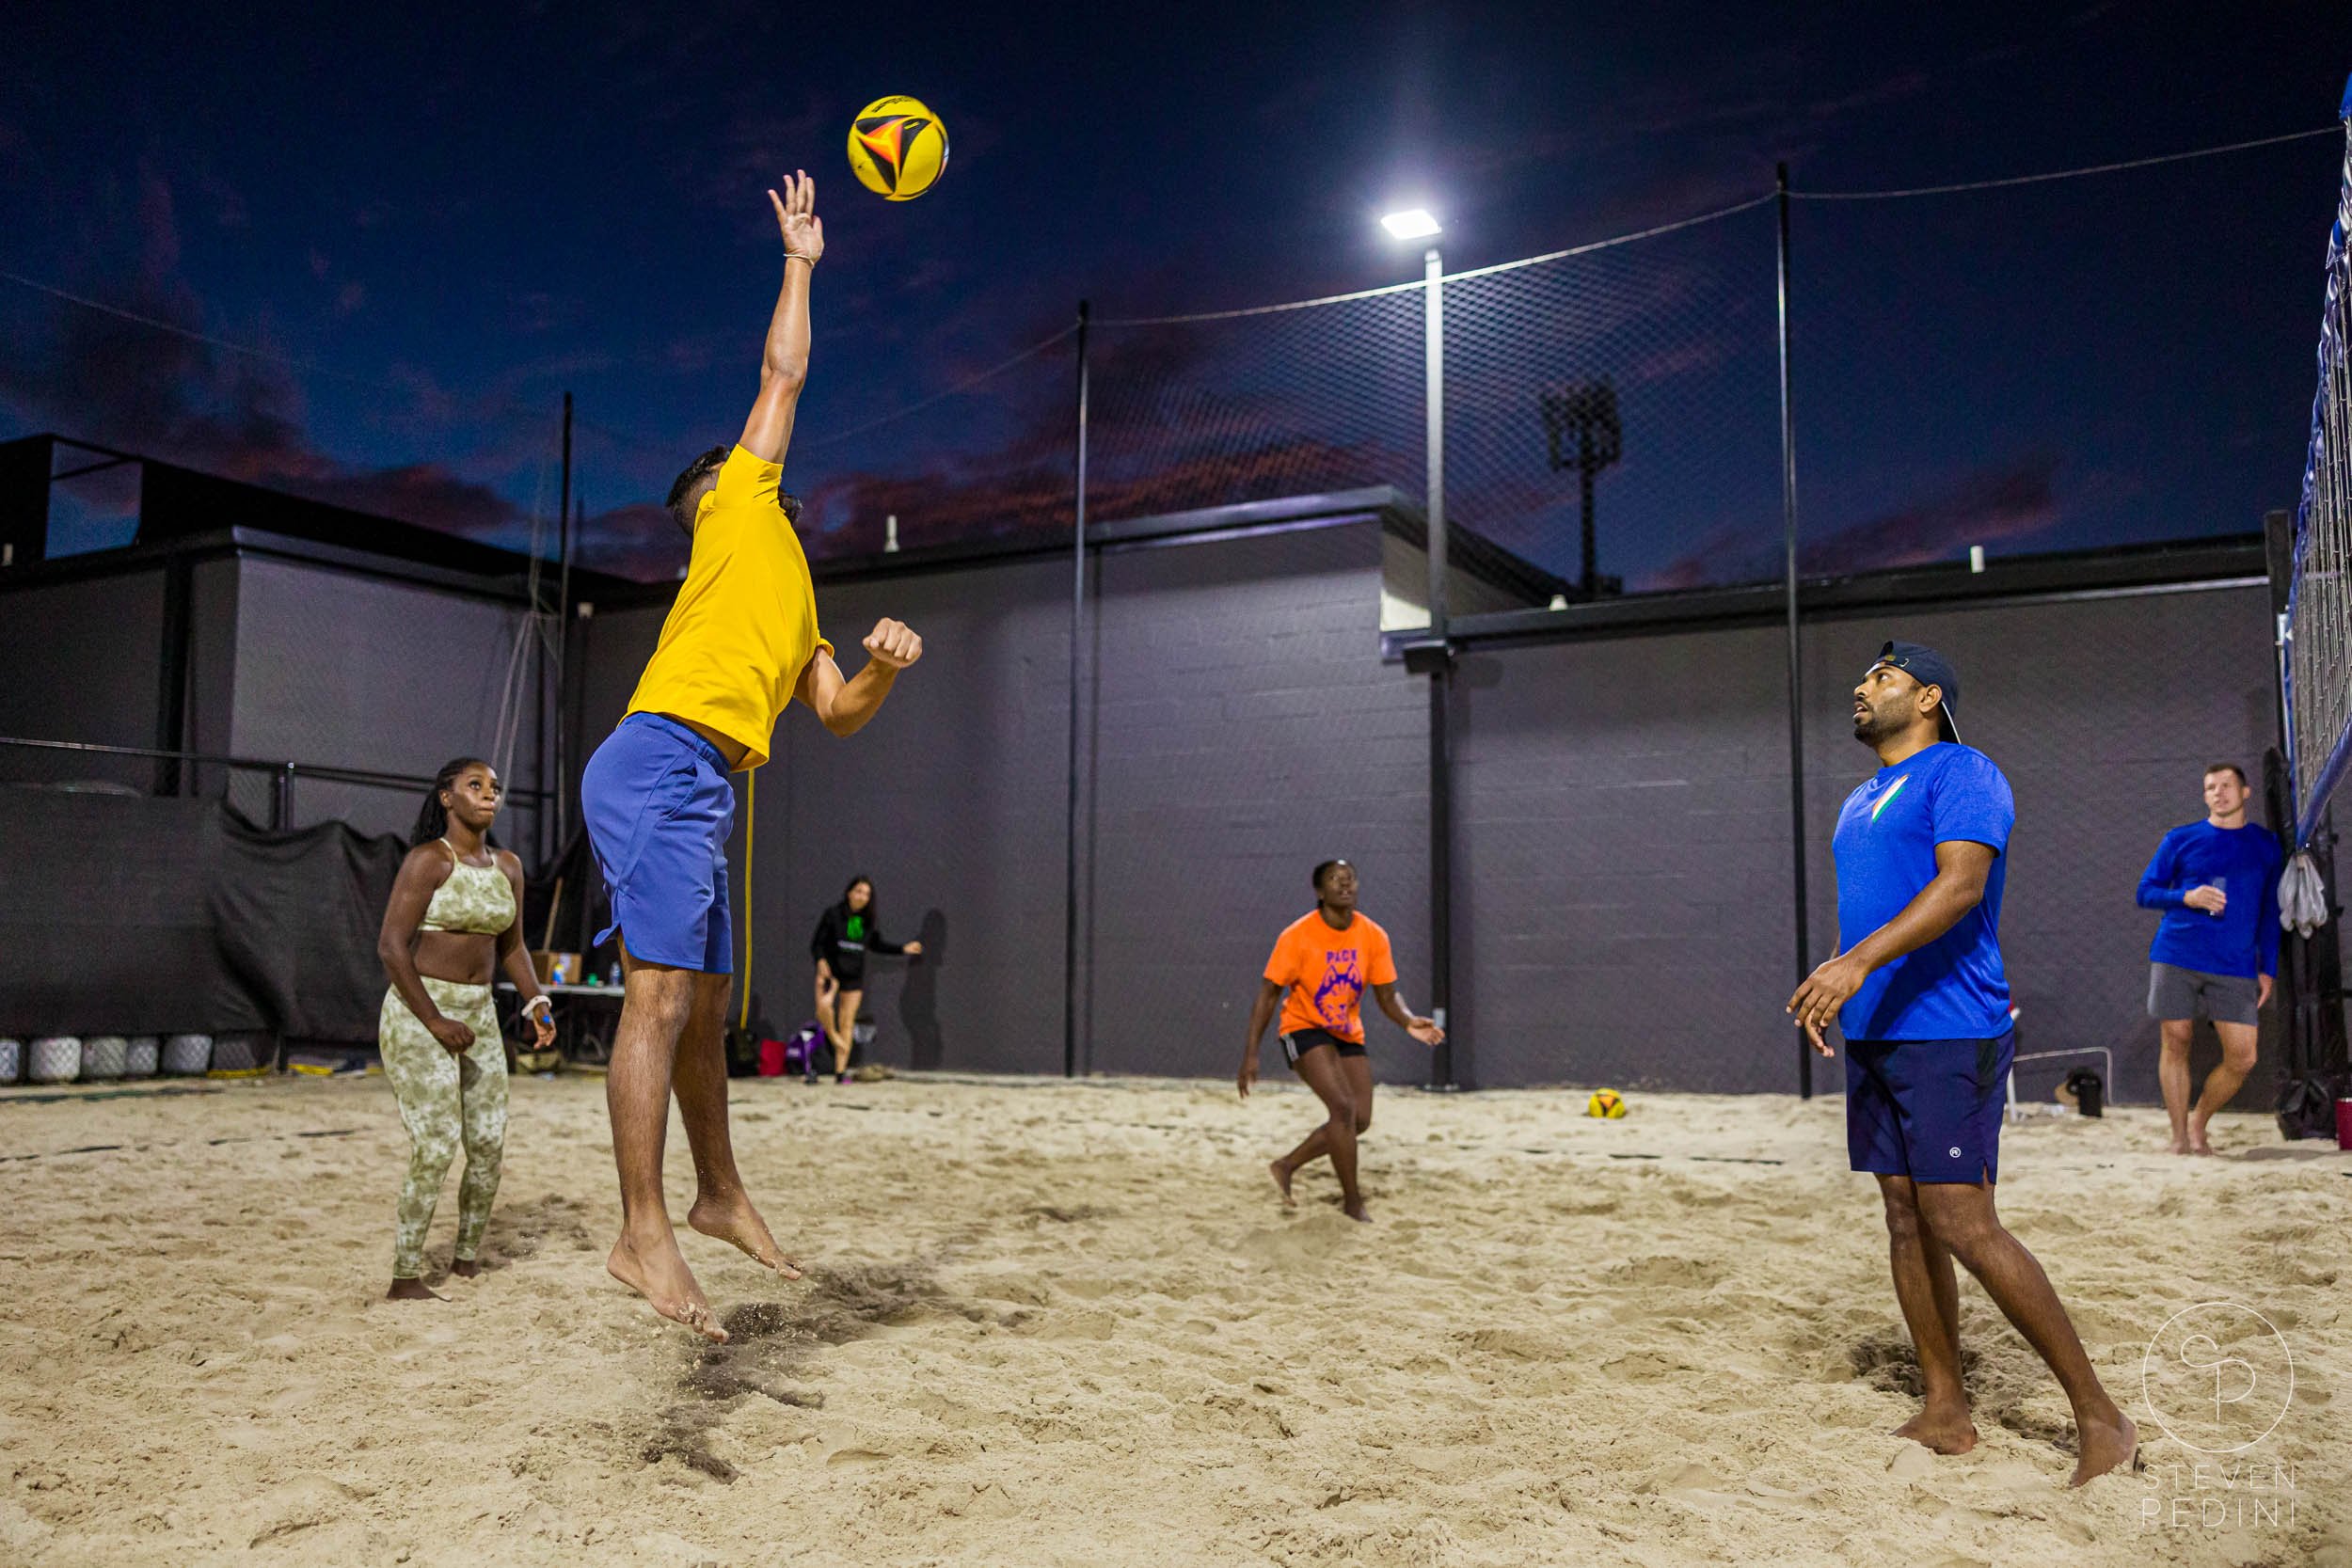 Steven Pedini Photography - Bumpy Pickle - Sand Volleyball - Houston TX - World Cup of Volleyball - 00360.jpg